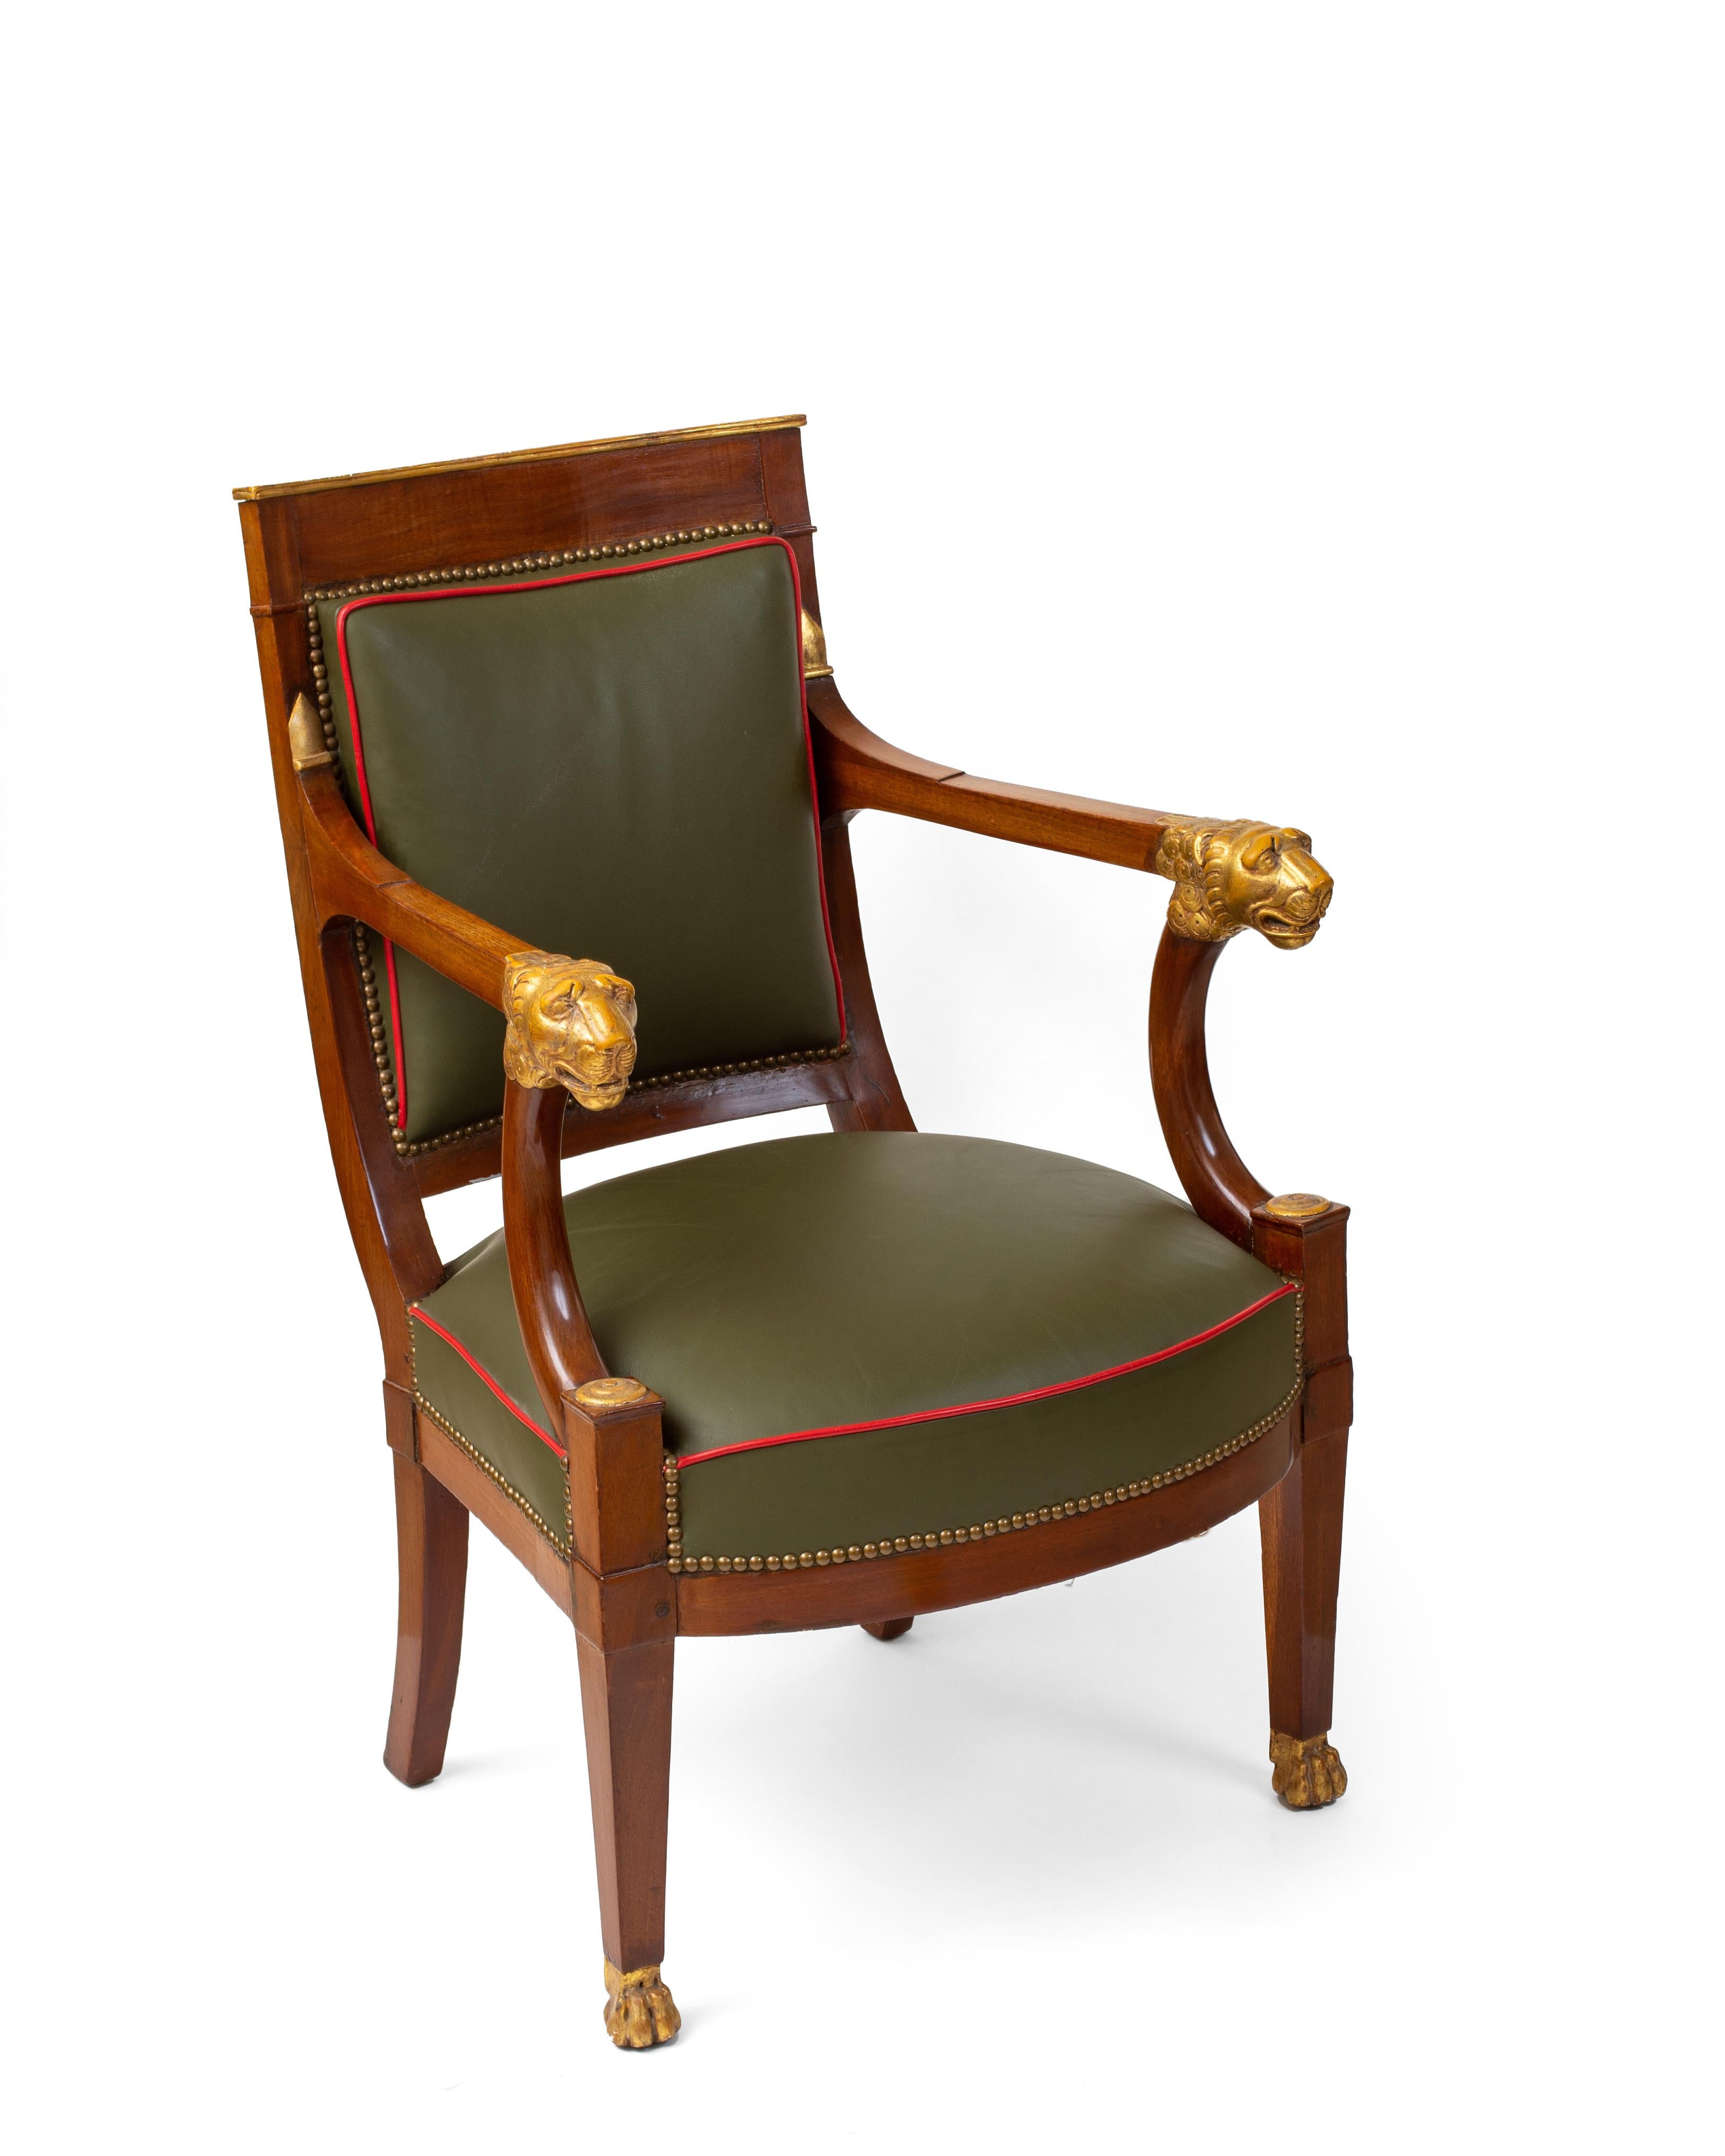 Each curved crestrail above a square padded back and seat, the arms terminating in lion heads, raised on tapering square legs ending in lion paw feet. Upholstered in two-tone leather.
The elegantly curved arm supports, the beautiful carving and the